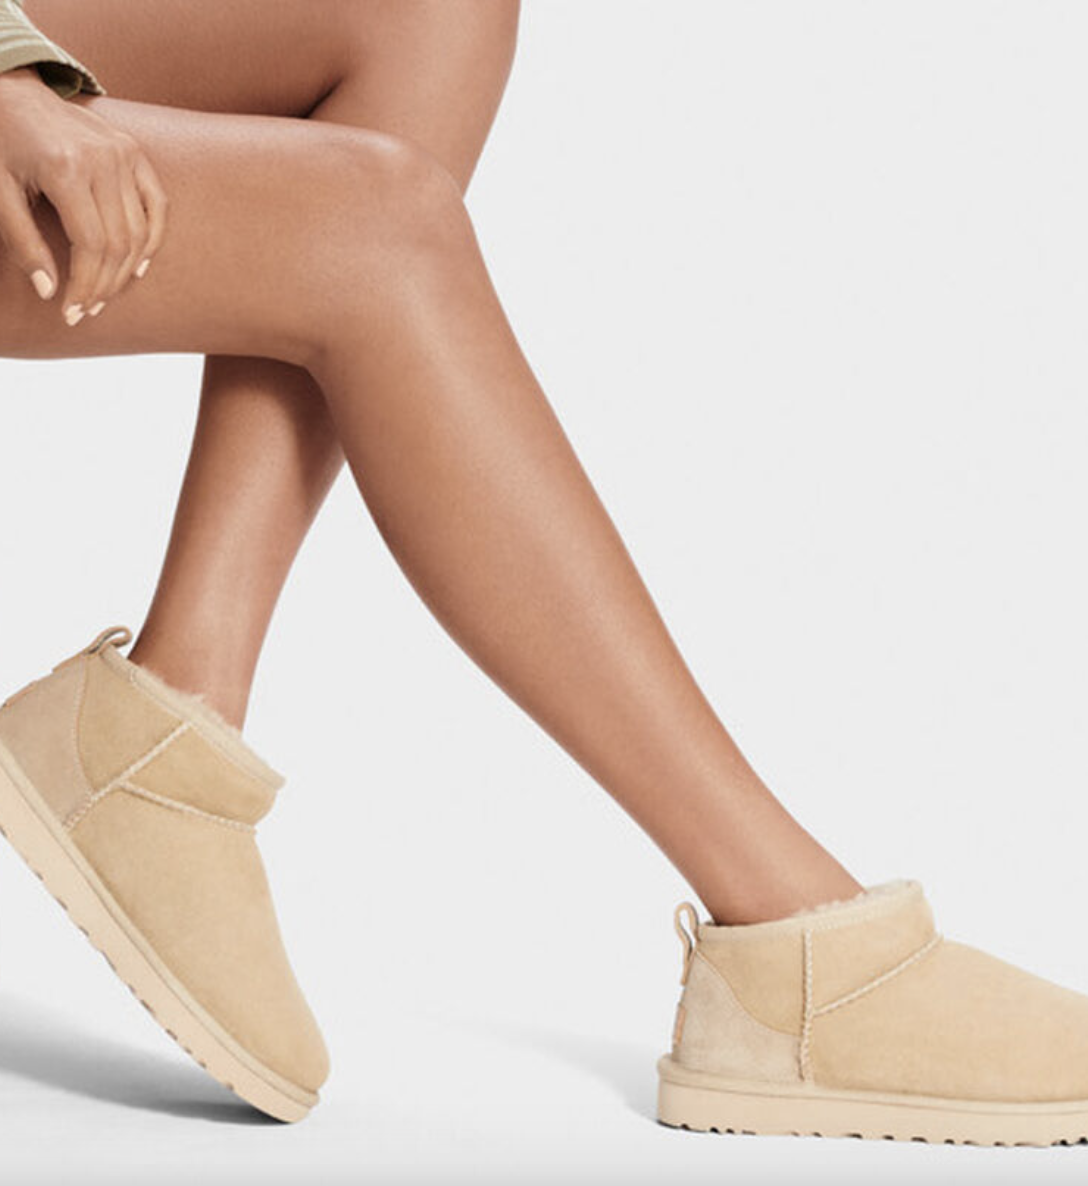 Save on UGG classics, like the UGG ultra minis this Black Friday!